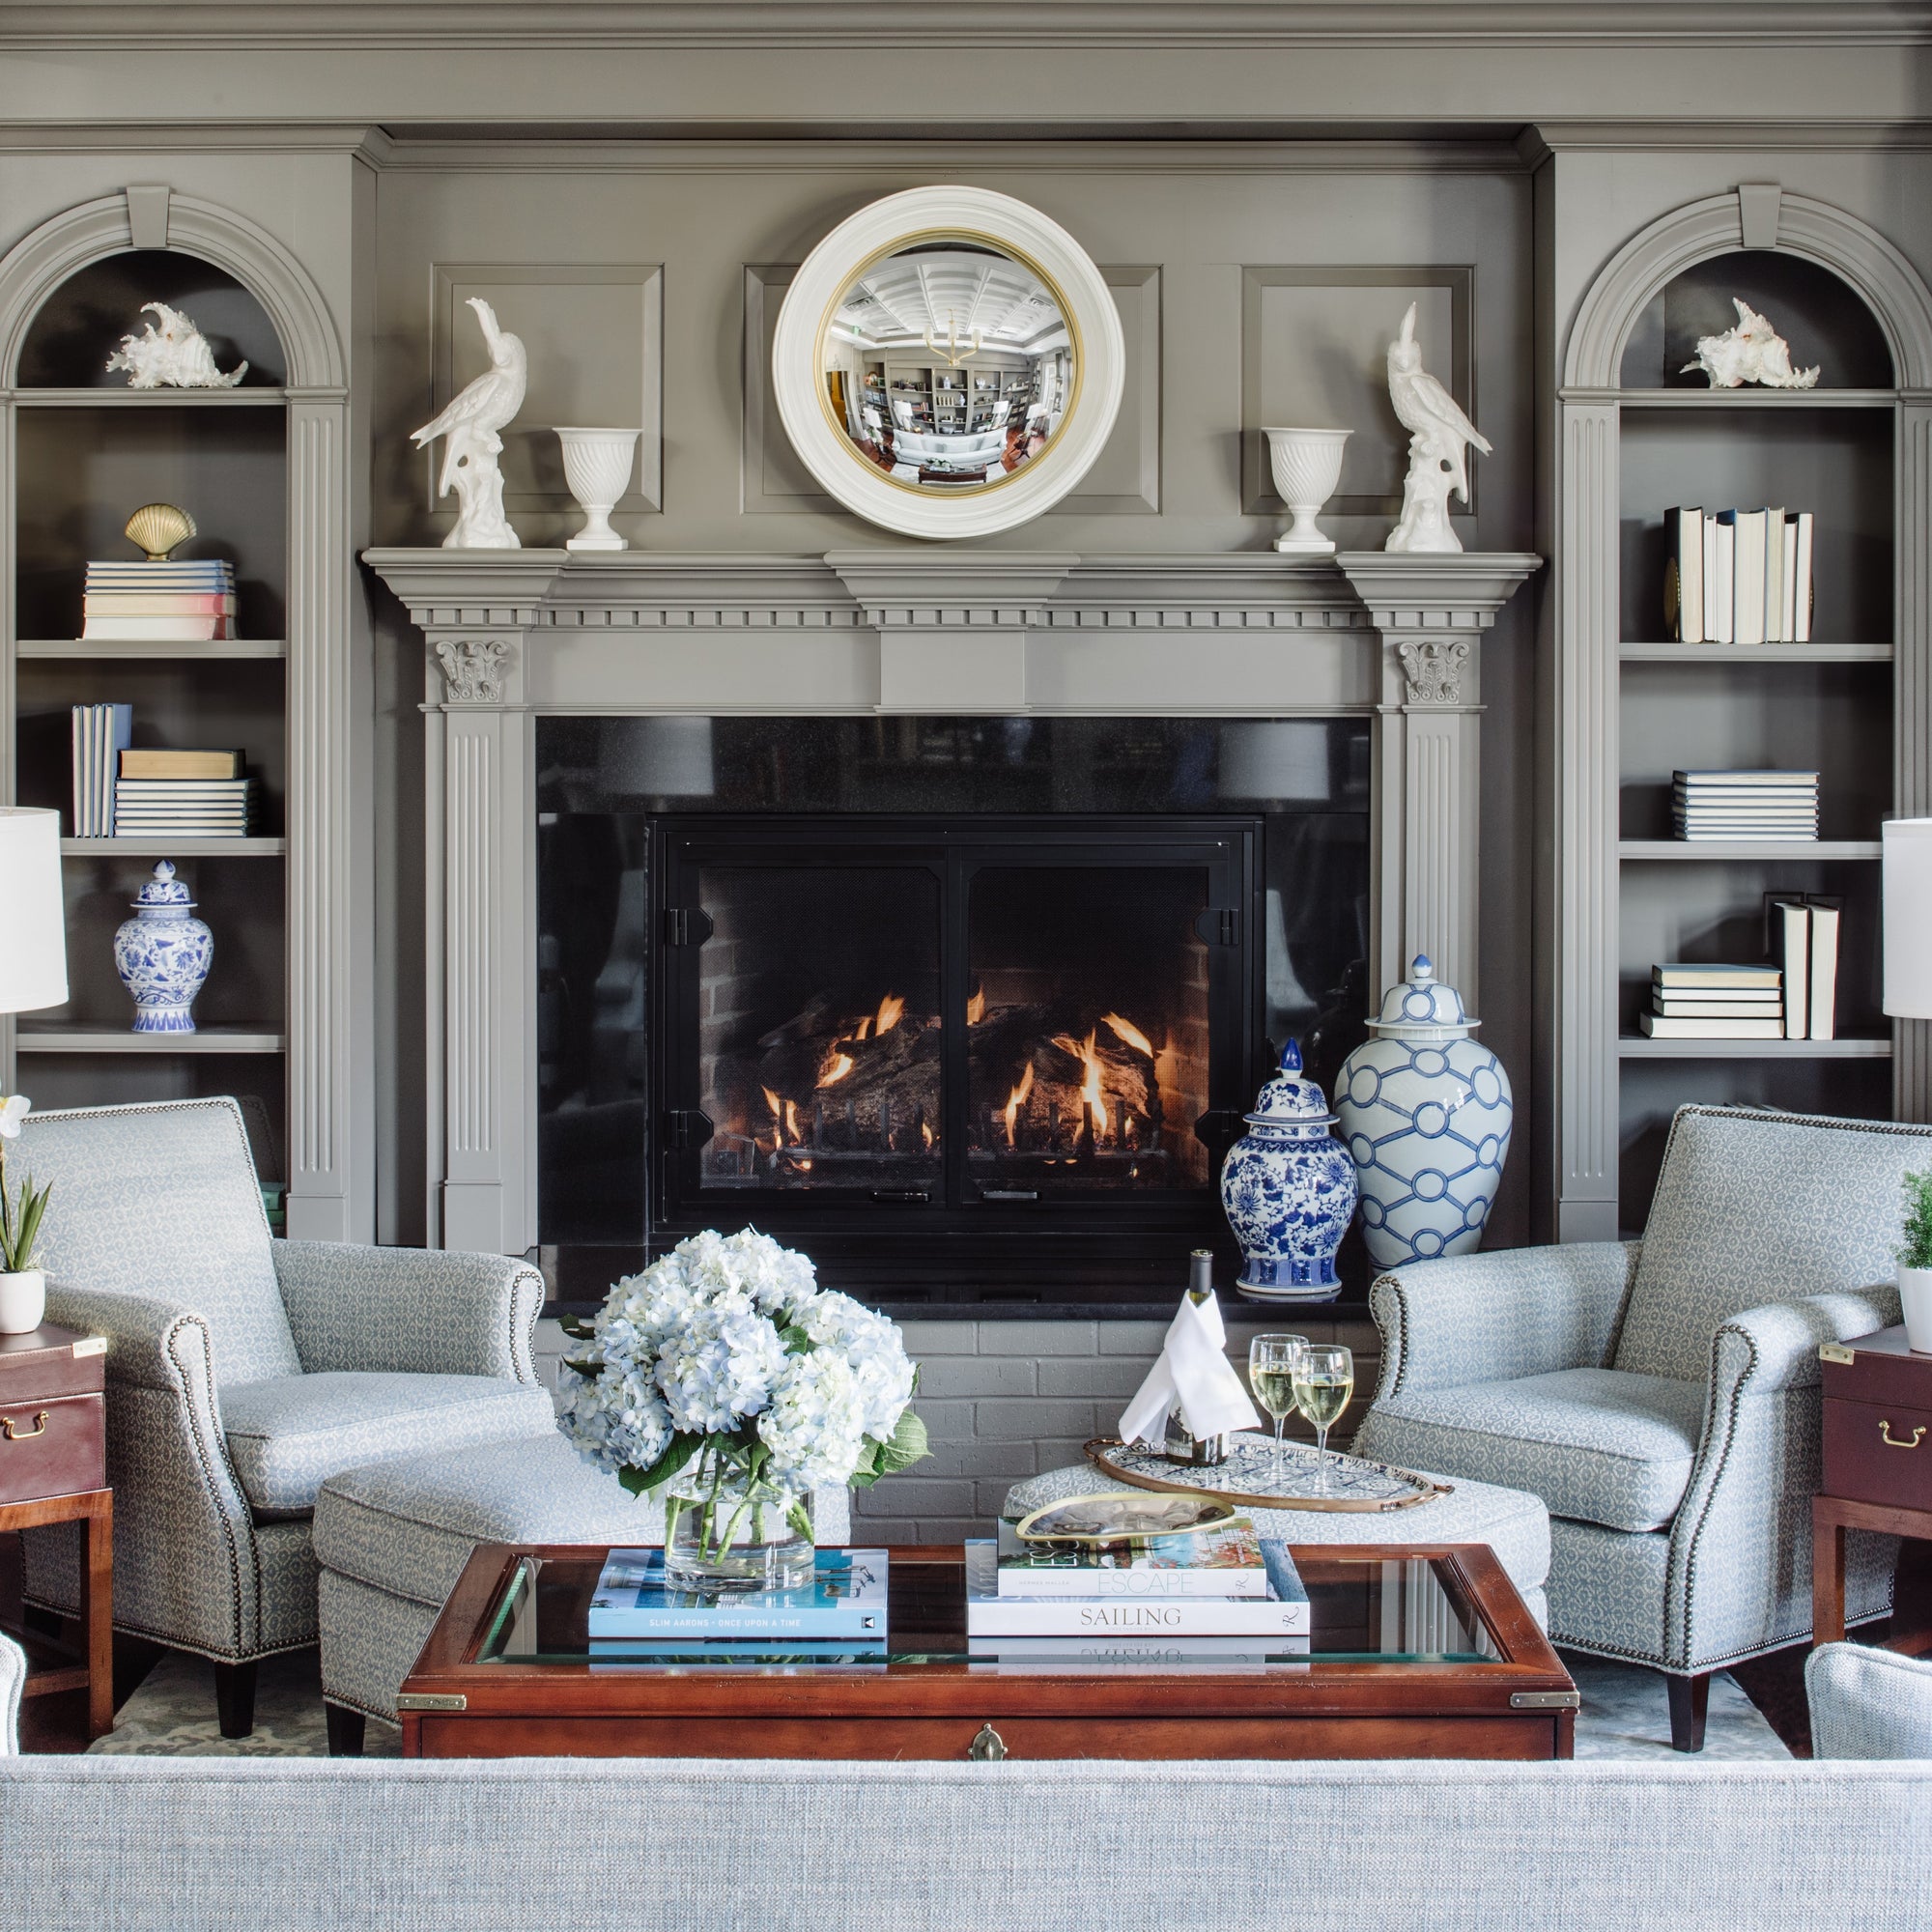 Fireplace in the library at the Bellmoor Inn in Rehoboth Beach, DE - Design by Jamie Merida